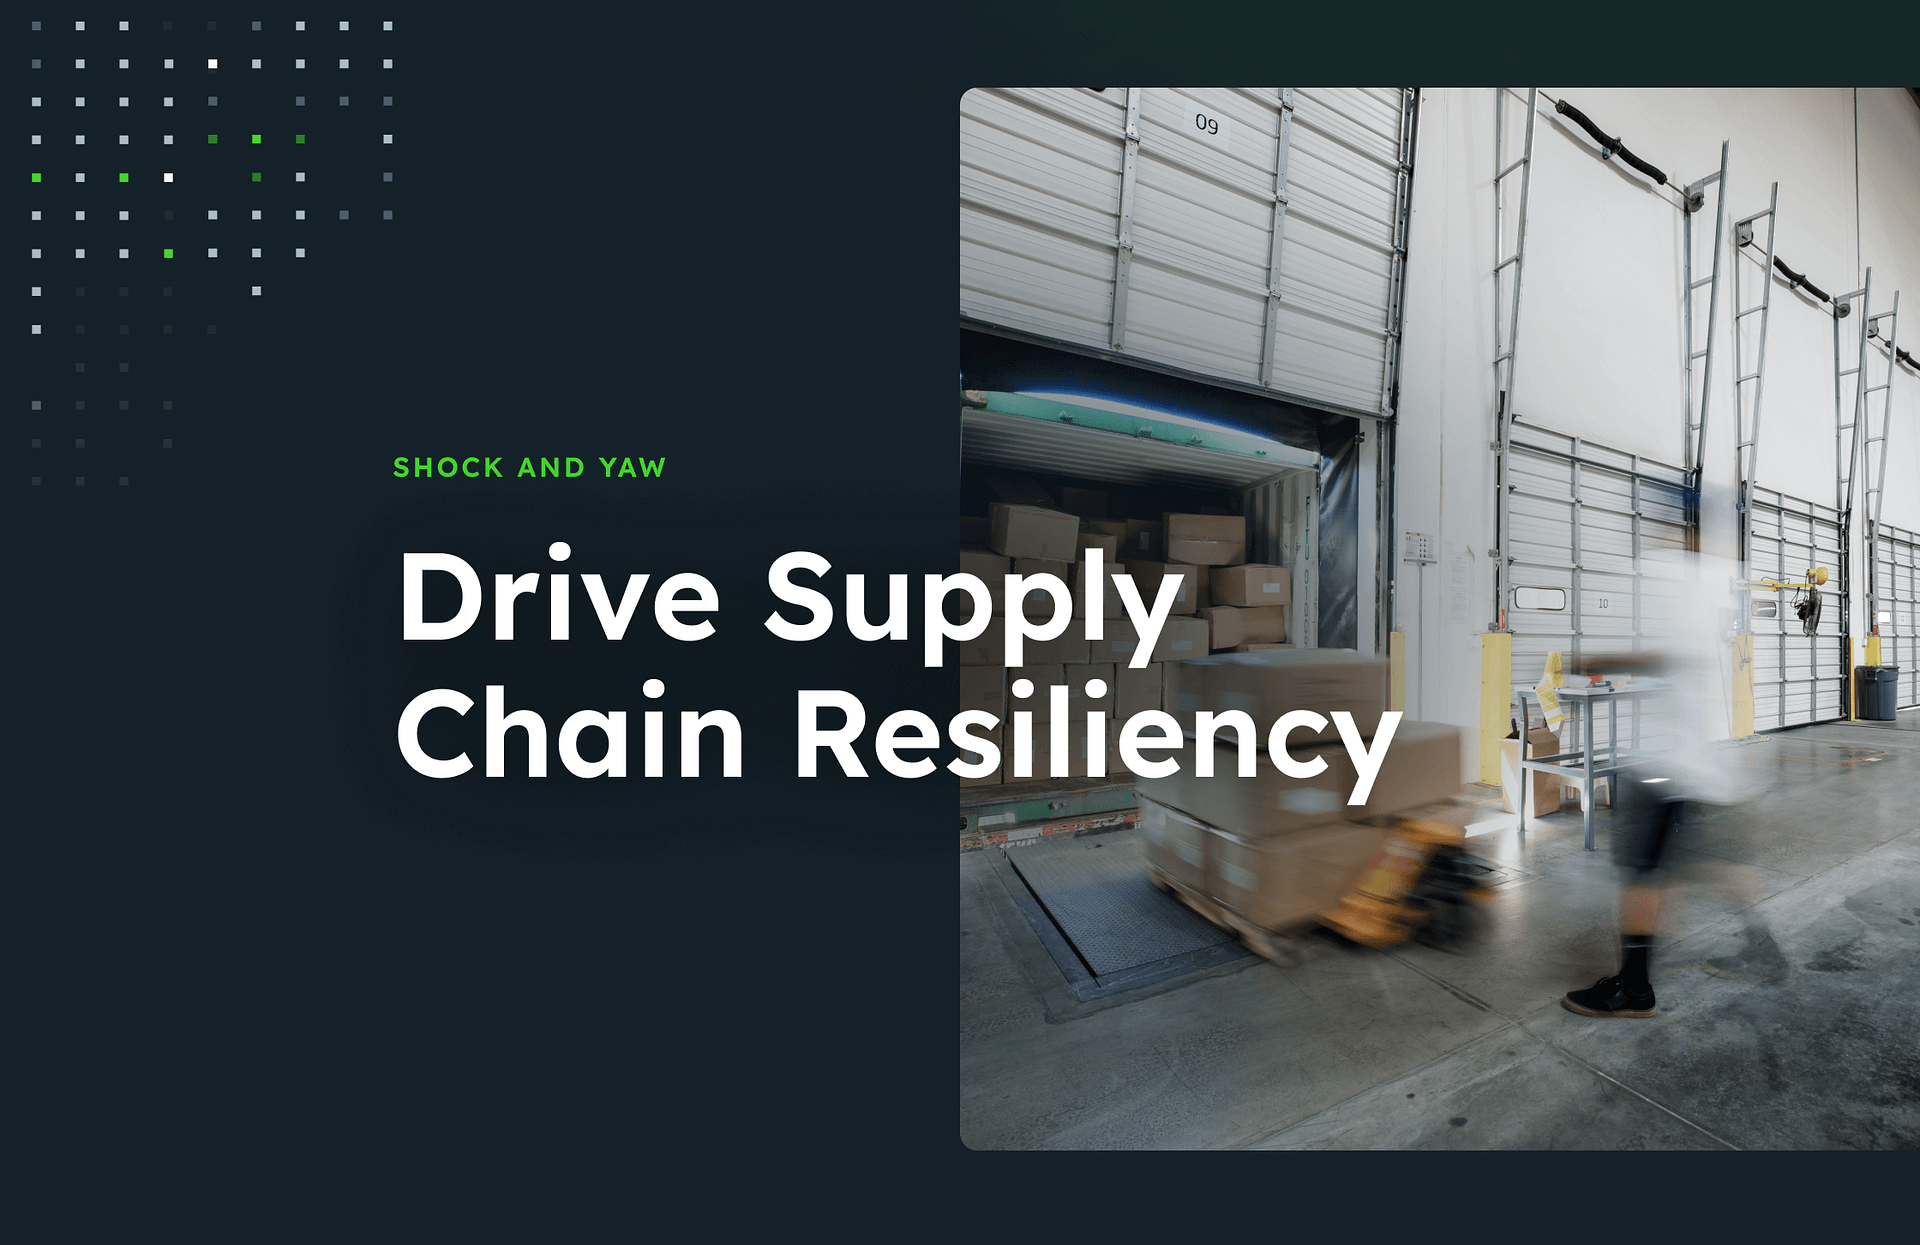 Drive supply chain resiliency text on a half black background and half a warehouse photo